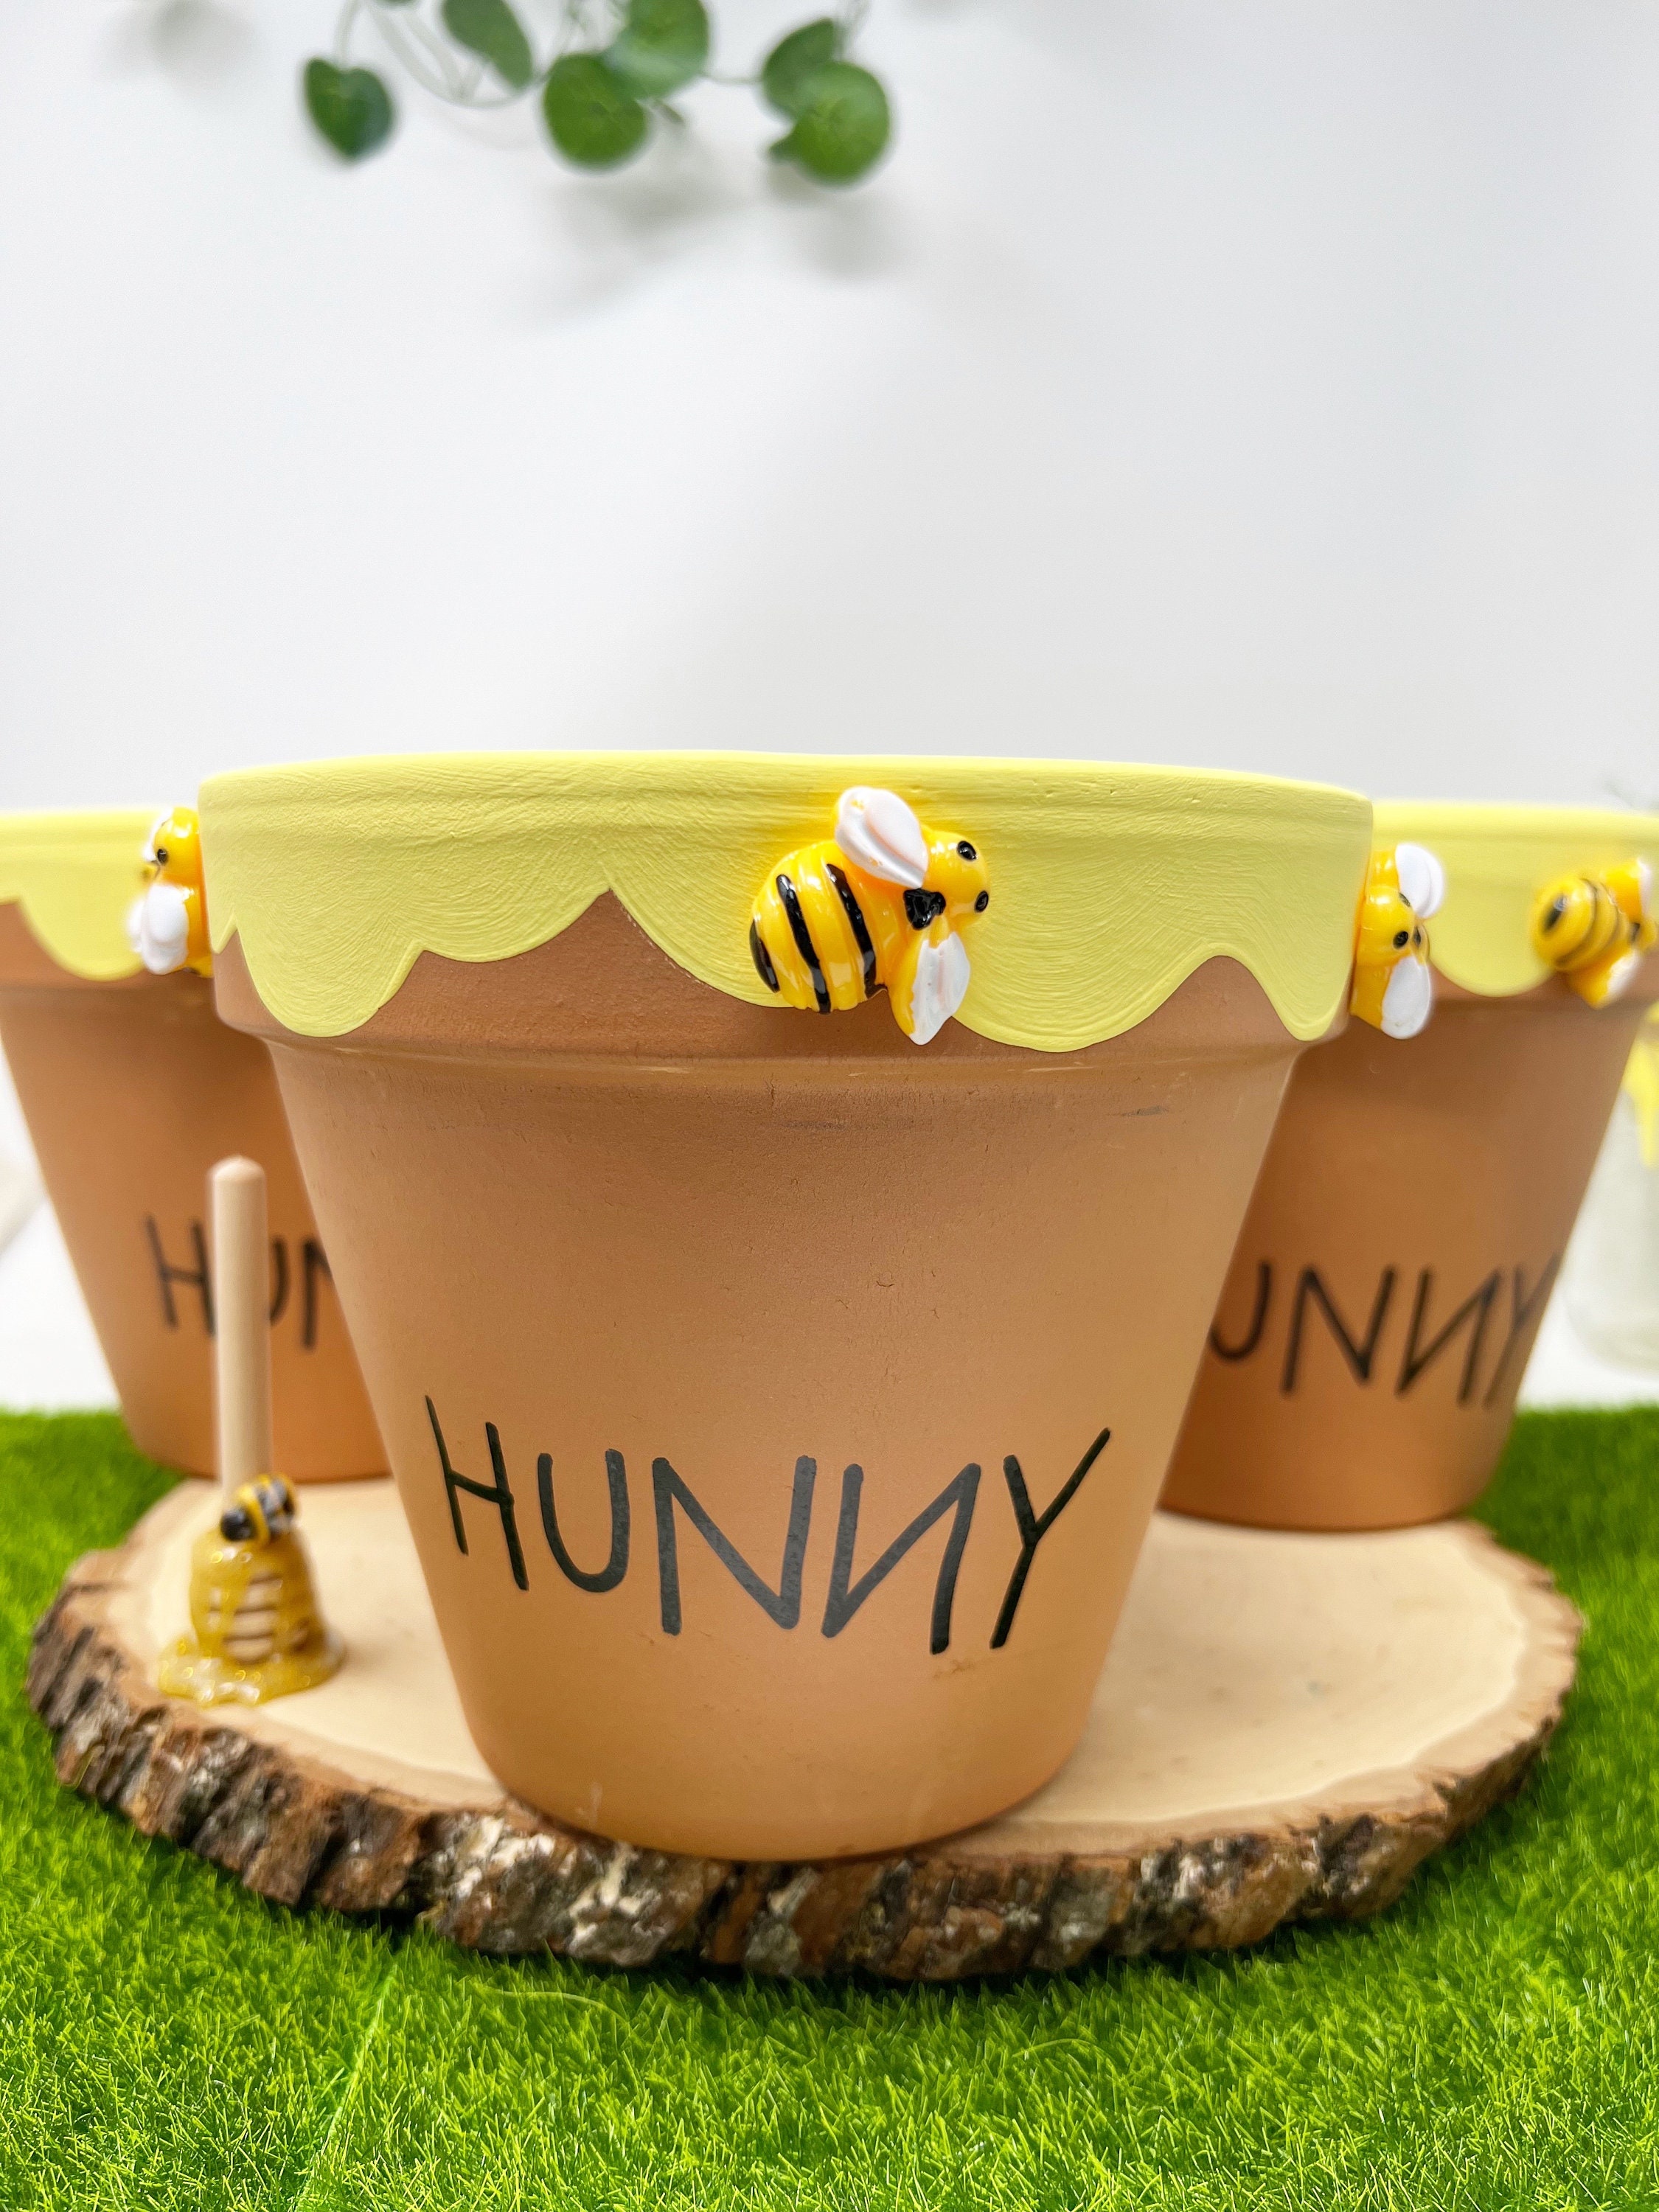 Winnie the Pooh Hunny Pots Centerpieces Party Favors for Birthdays, Baby  Showers, Mason Jar Centerpieces 